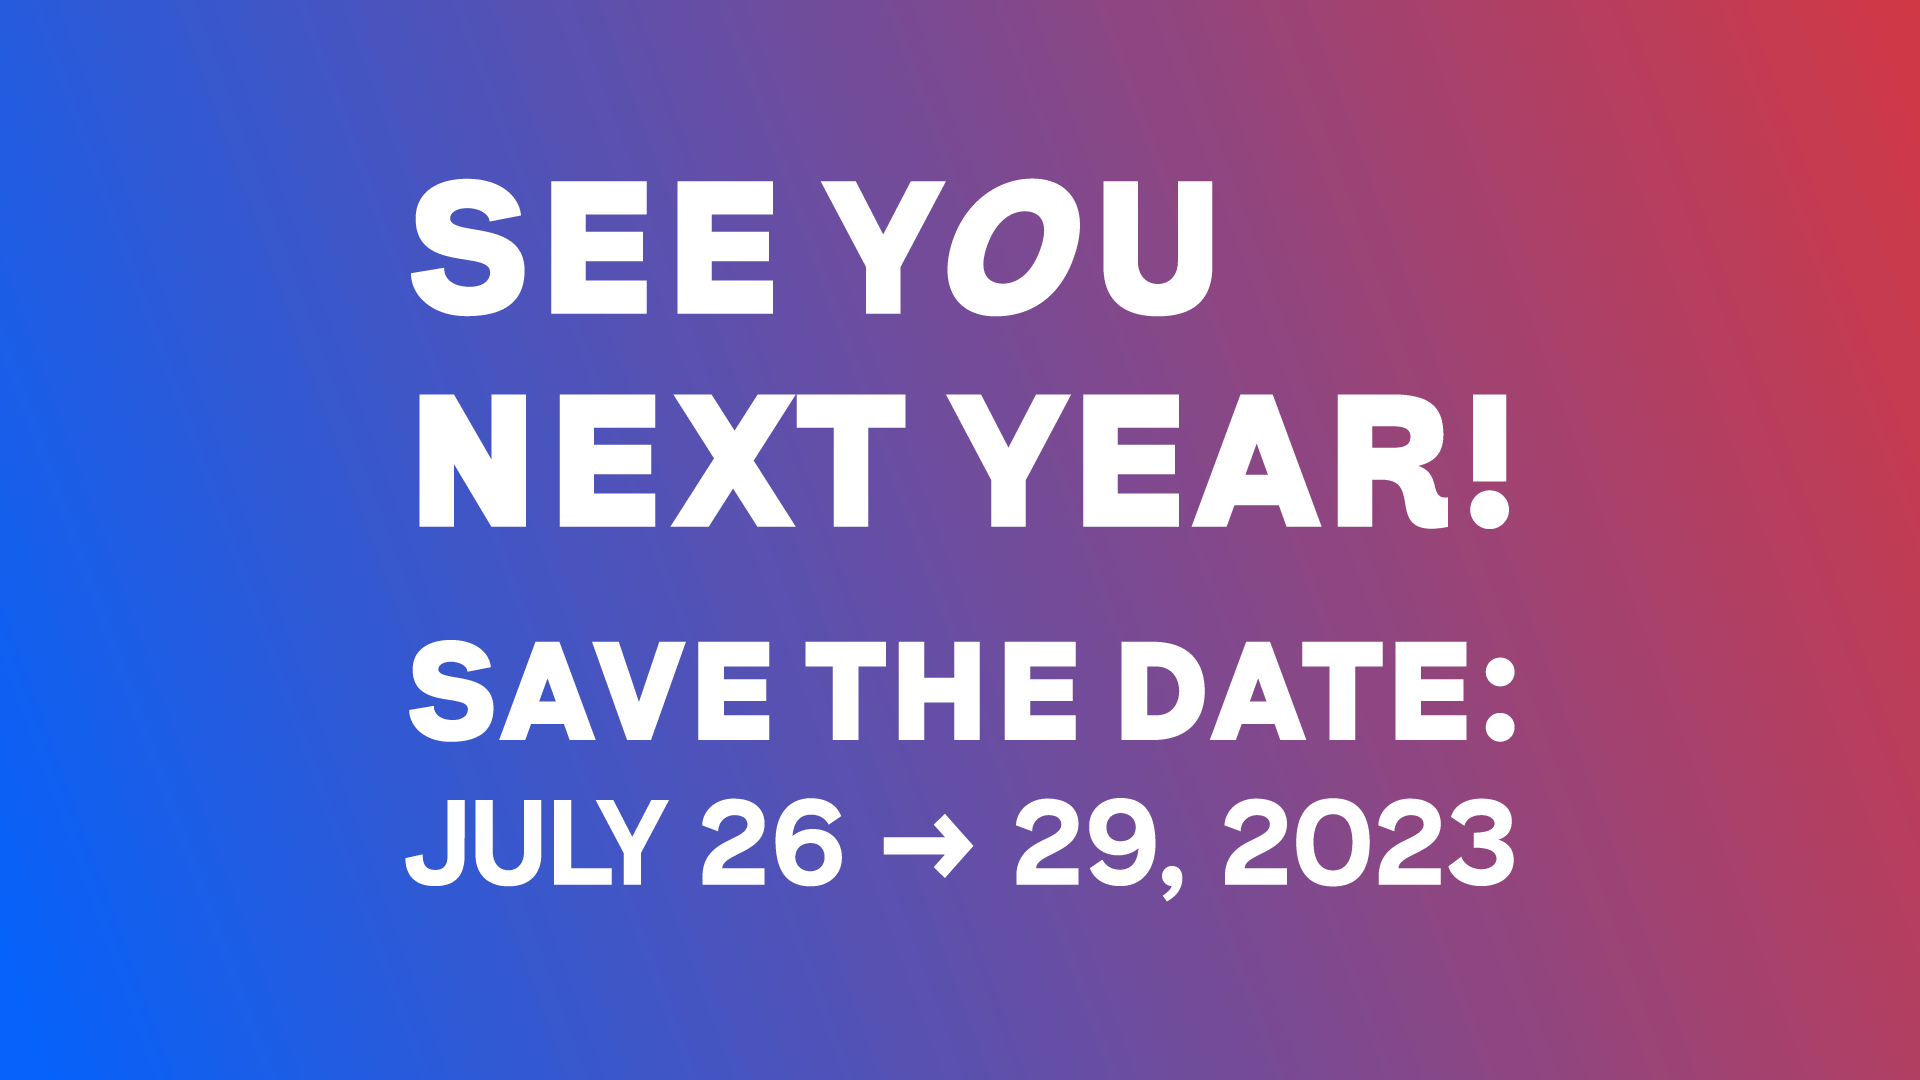 See you next year! Save the date: July 26 - 29, 2023